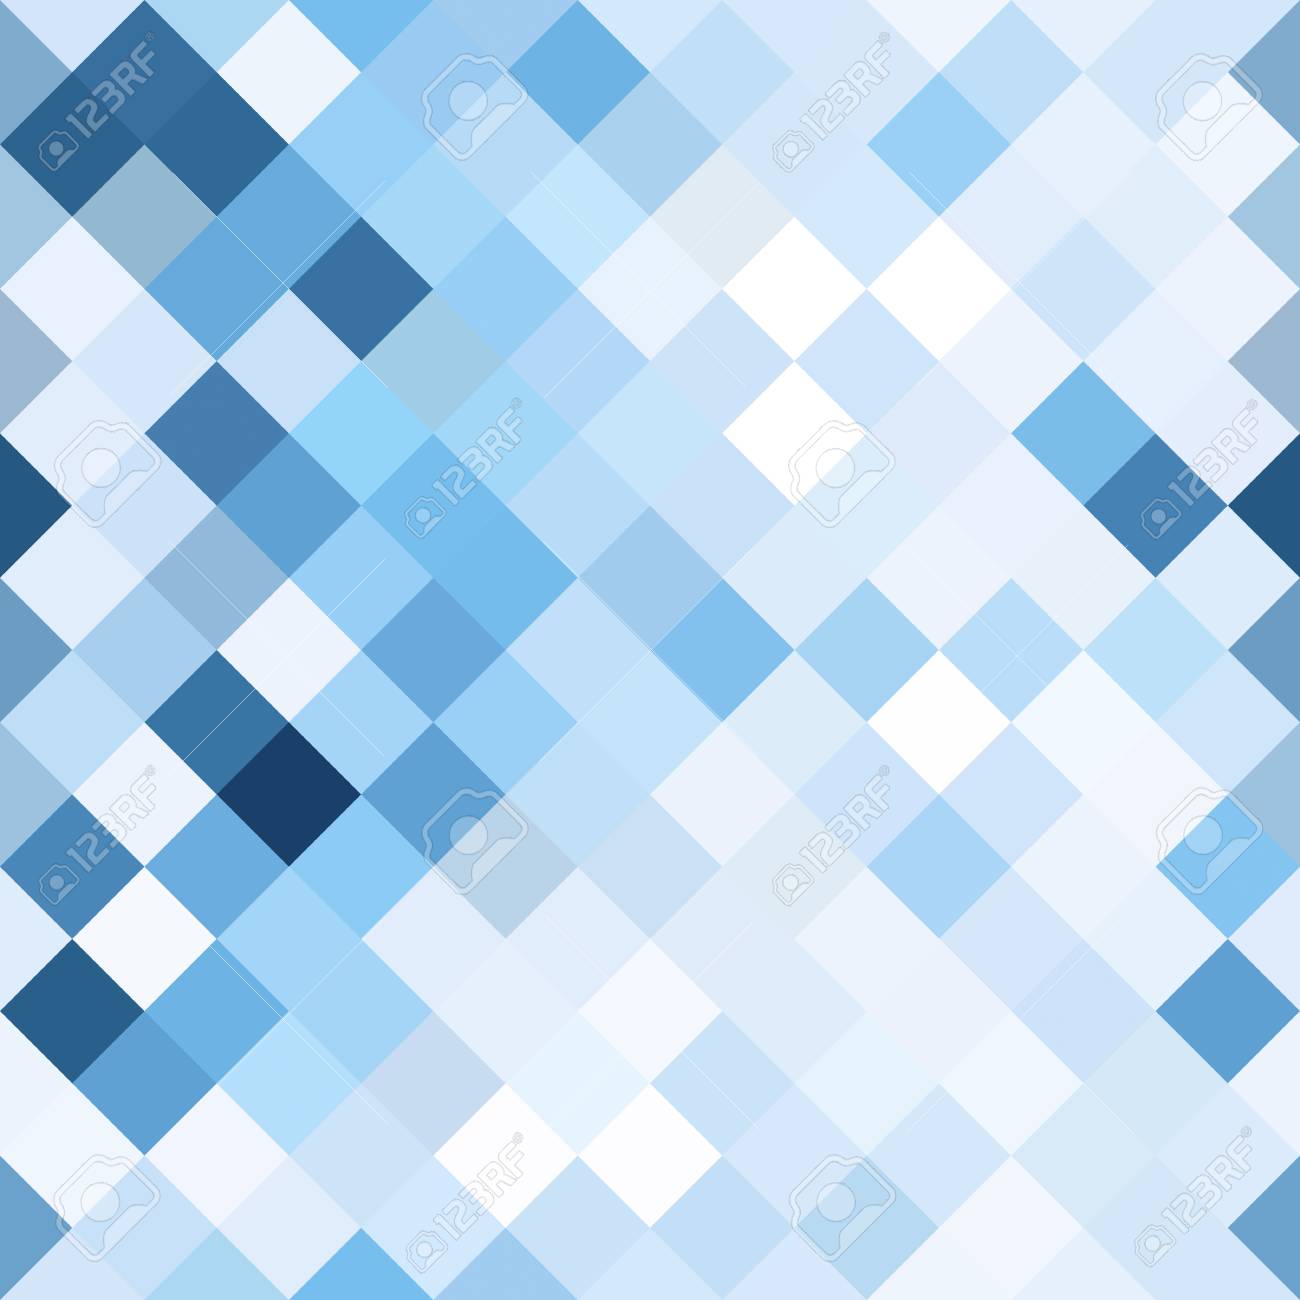 repeating background simple css